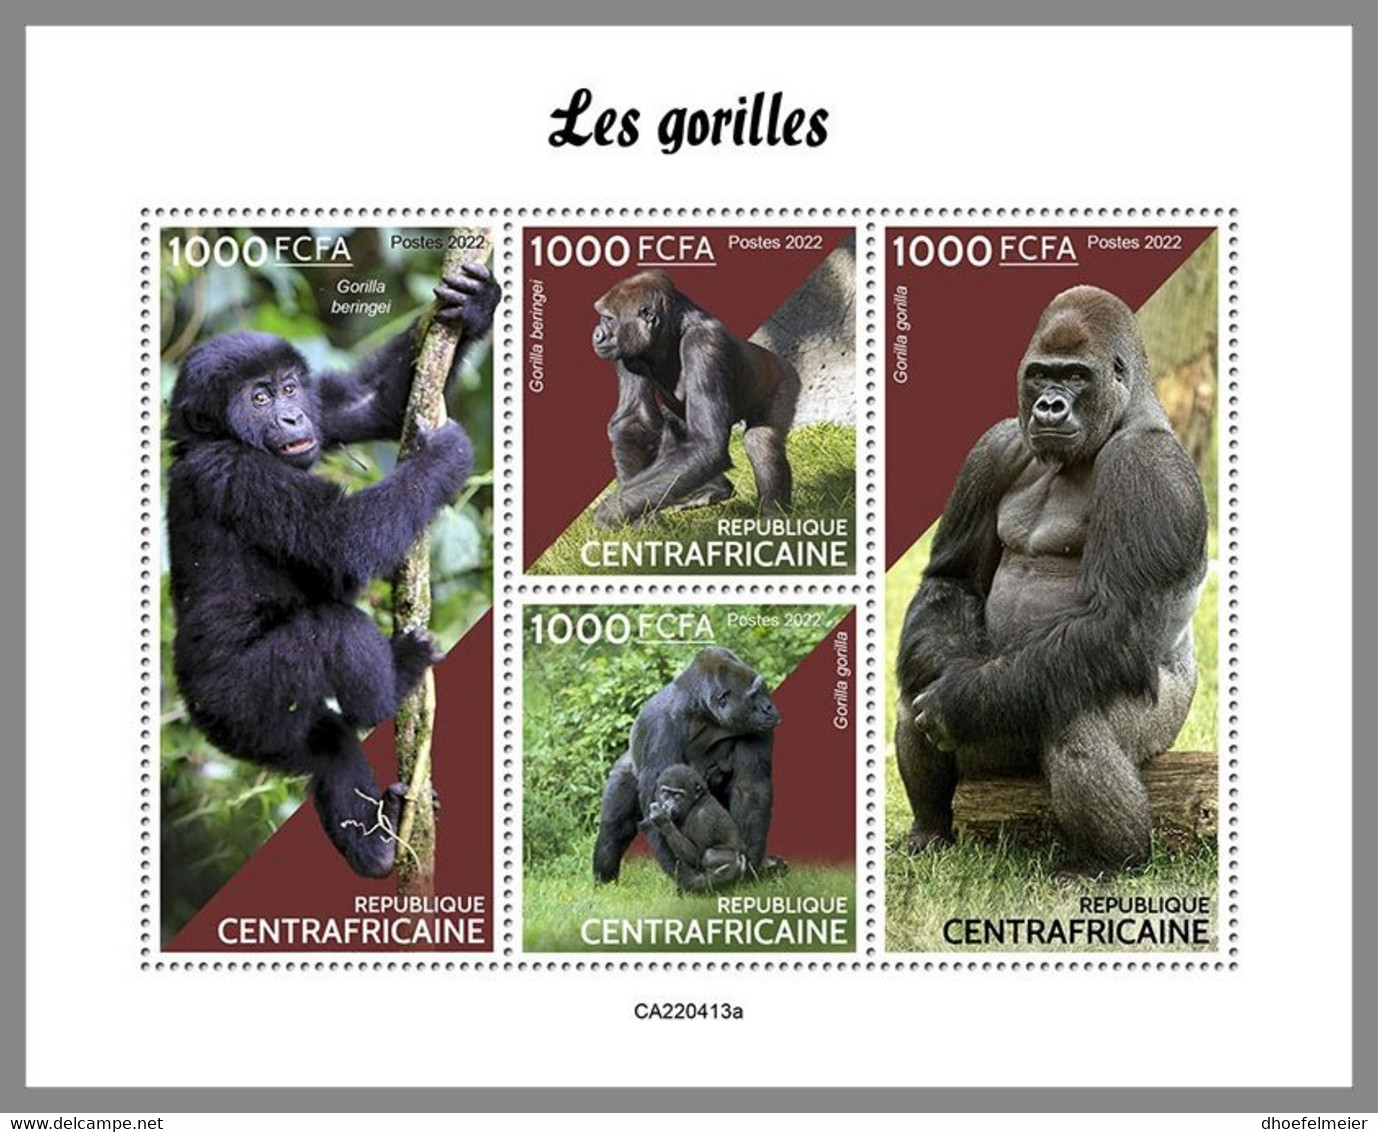 CENTRALAFRICA 2022 MNH Gorillas Gorilles M/S - OFFICIAL ISSUE - DHQ2241 - Gorilles